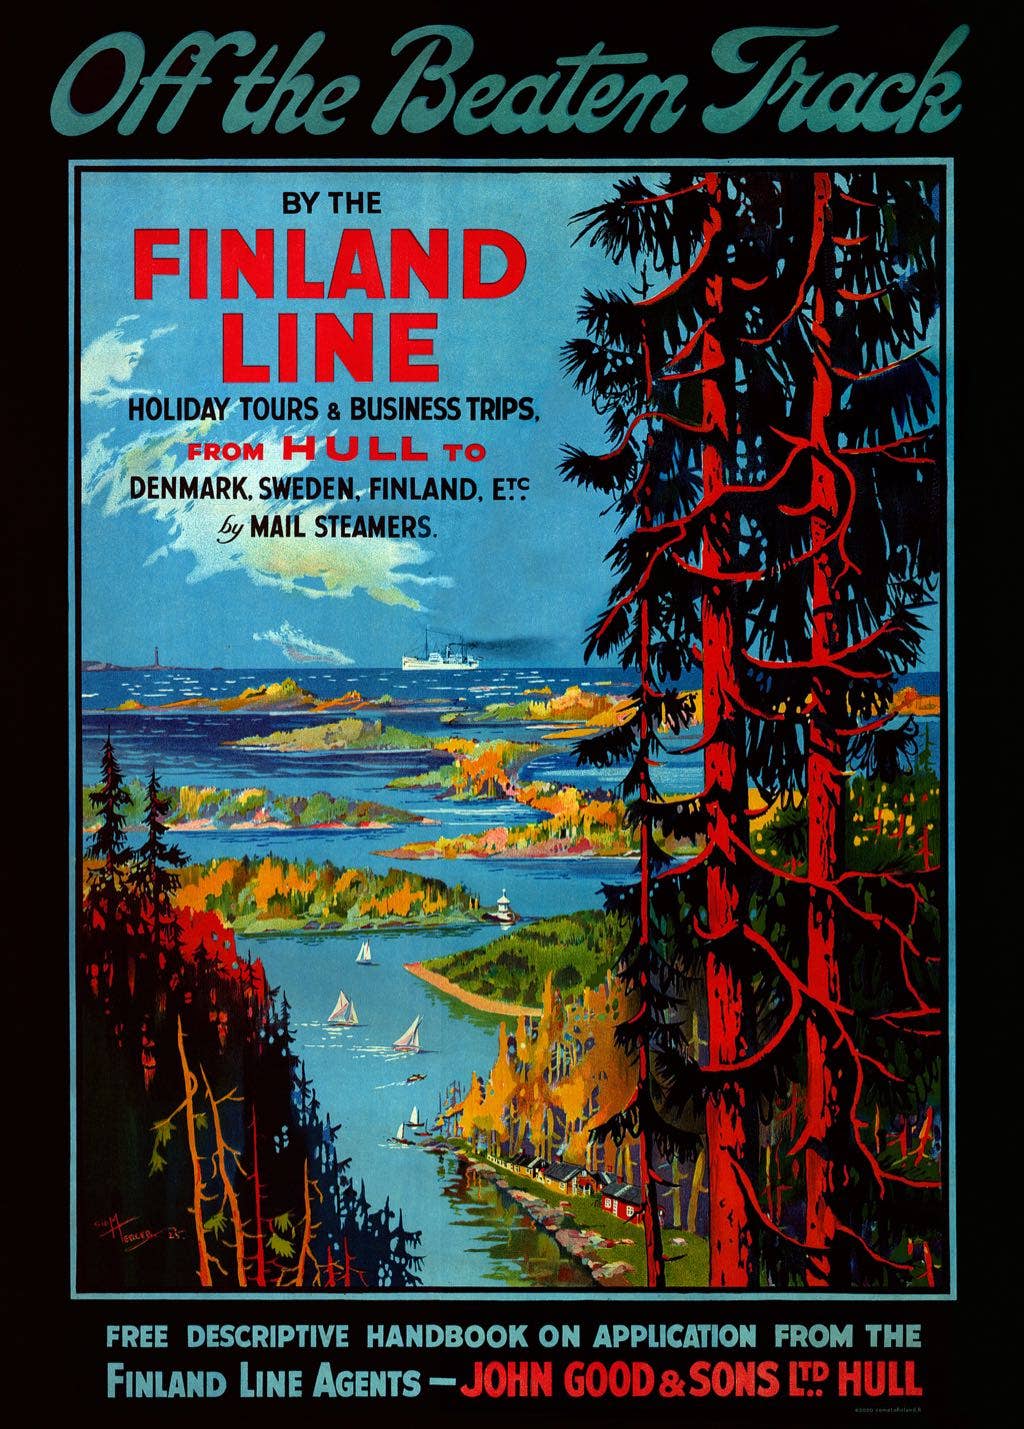 Poster: "Off the Beaten Track Finland Line"